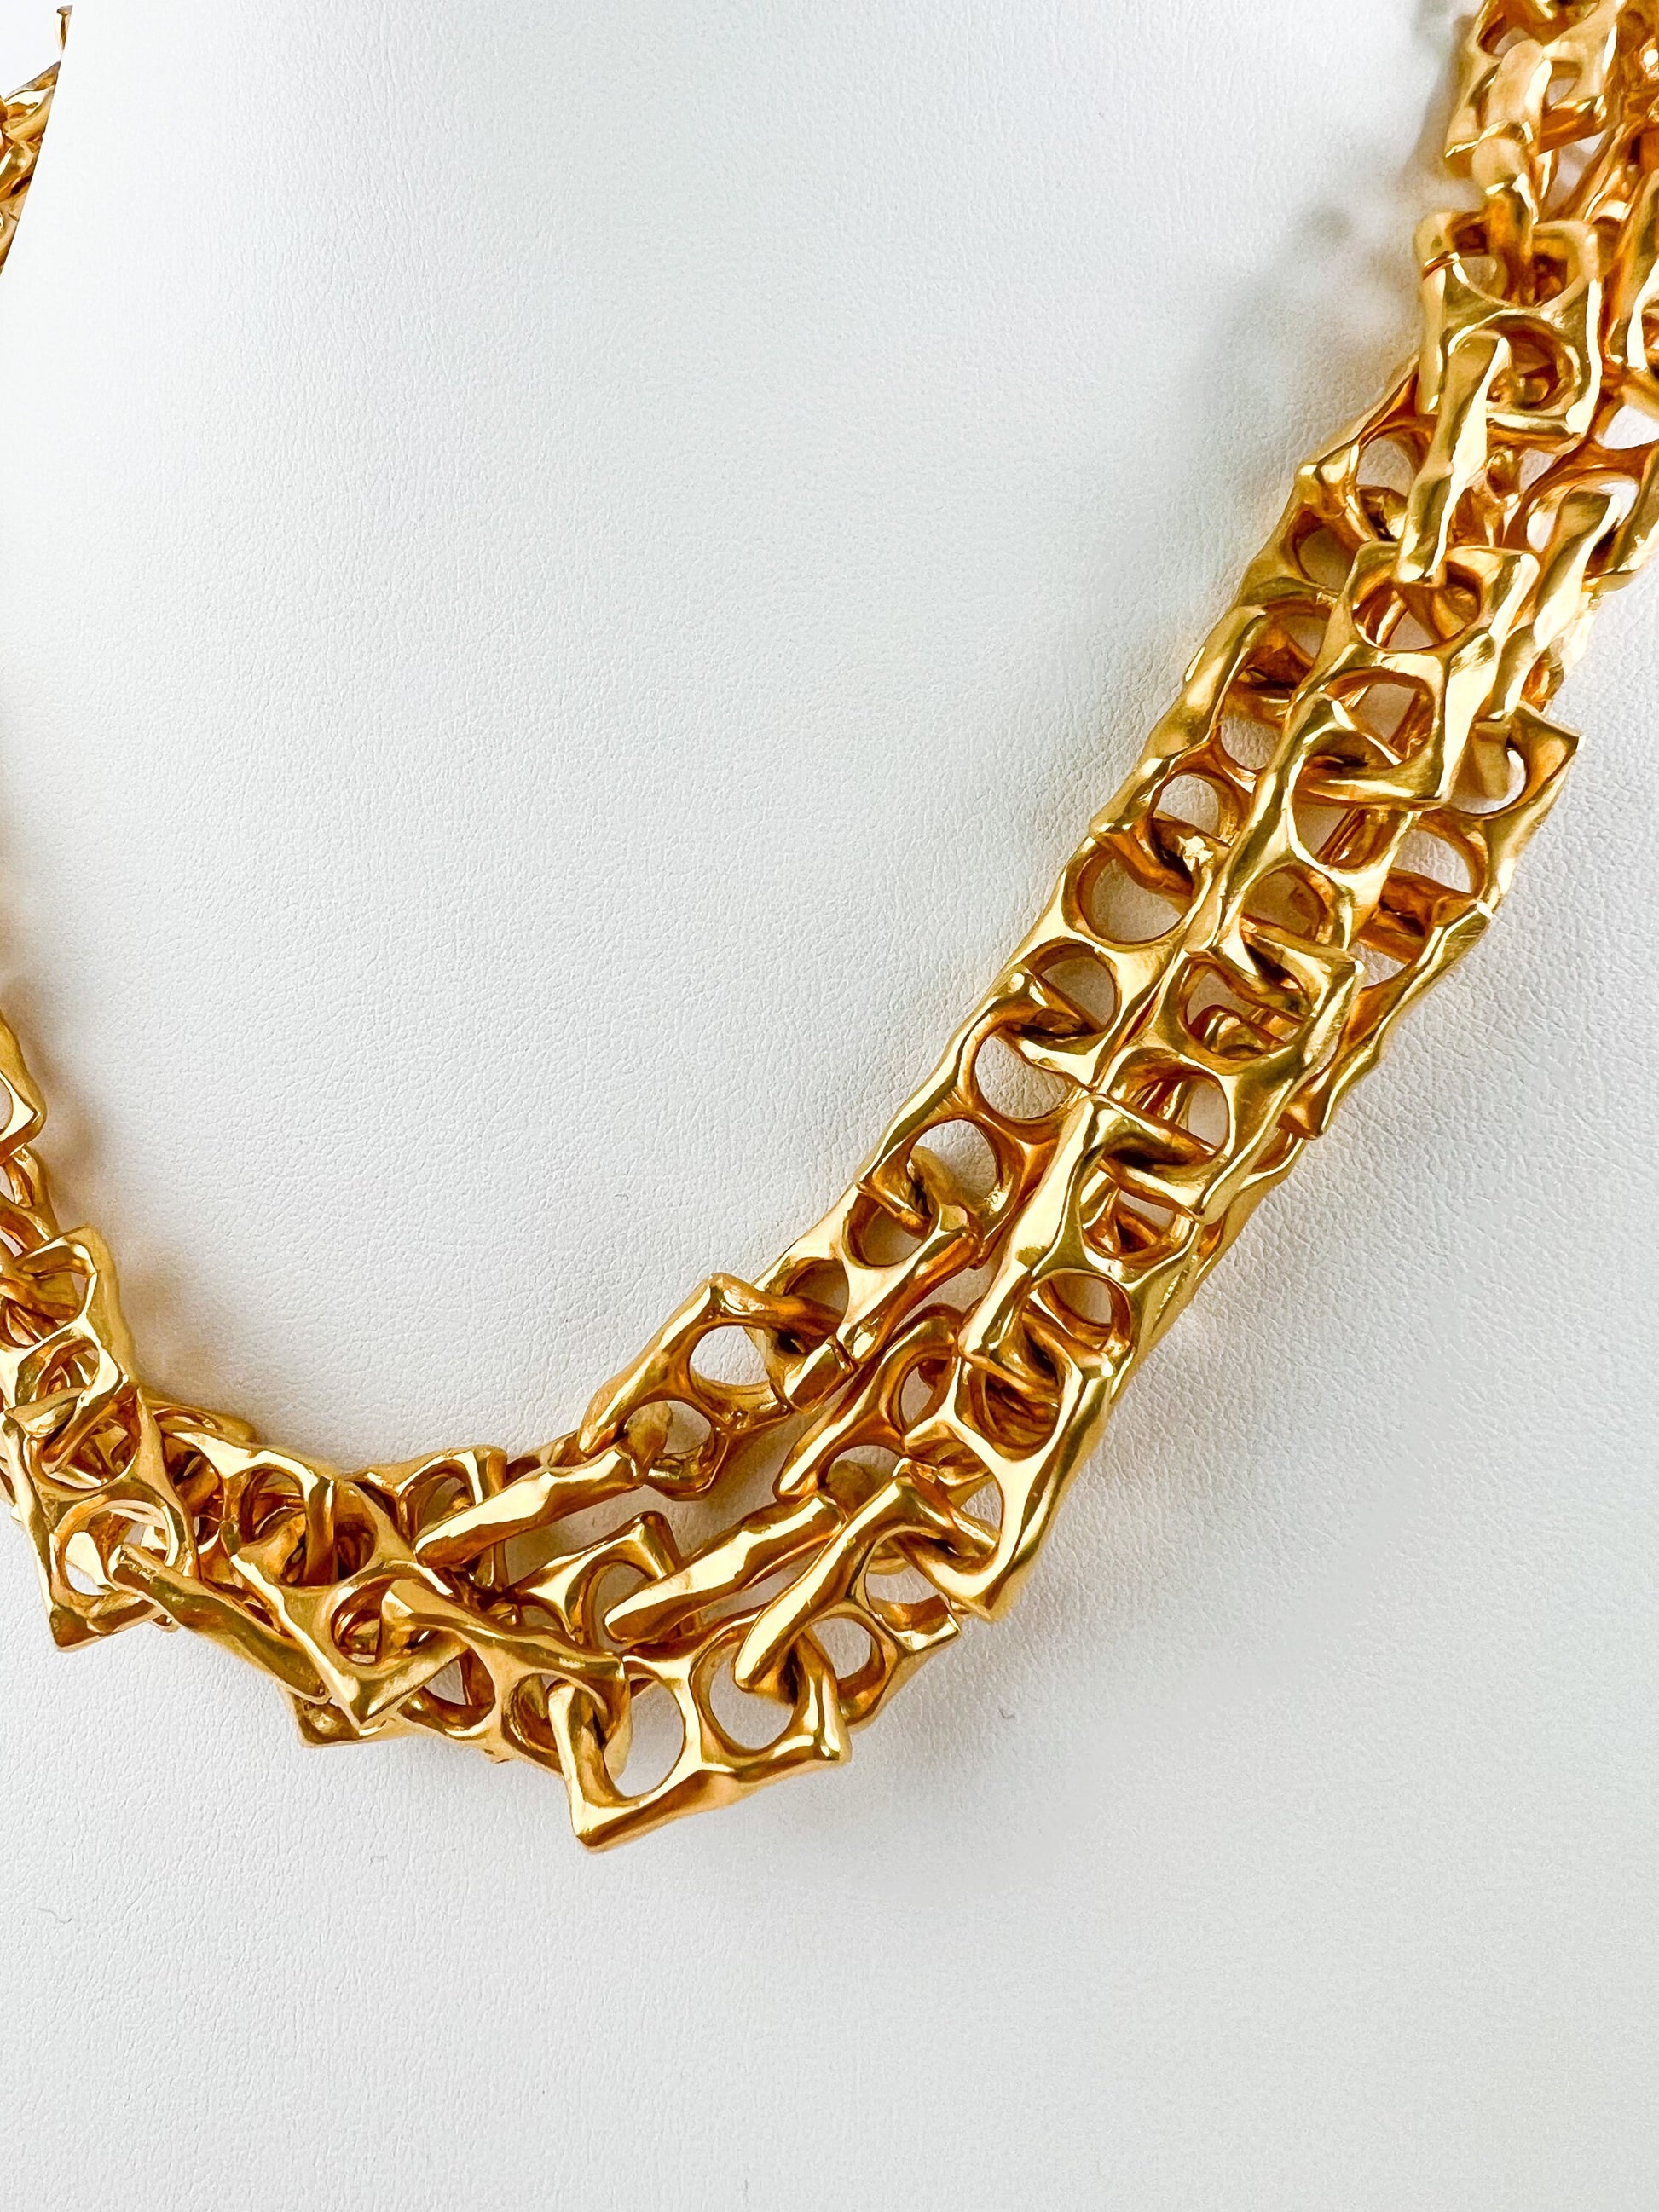 Vintage Karl Lagerfeld Necklace, Gold Tone Necklace, Multi-Strands Necklace, Chain Necklace, Very rare, Collector Piece, Personalized Gifts